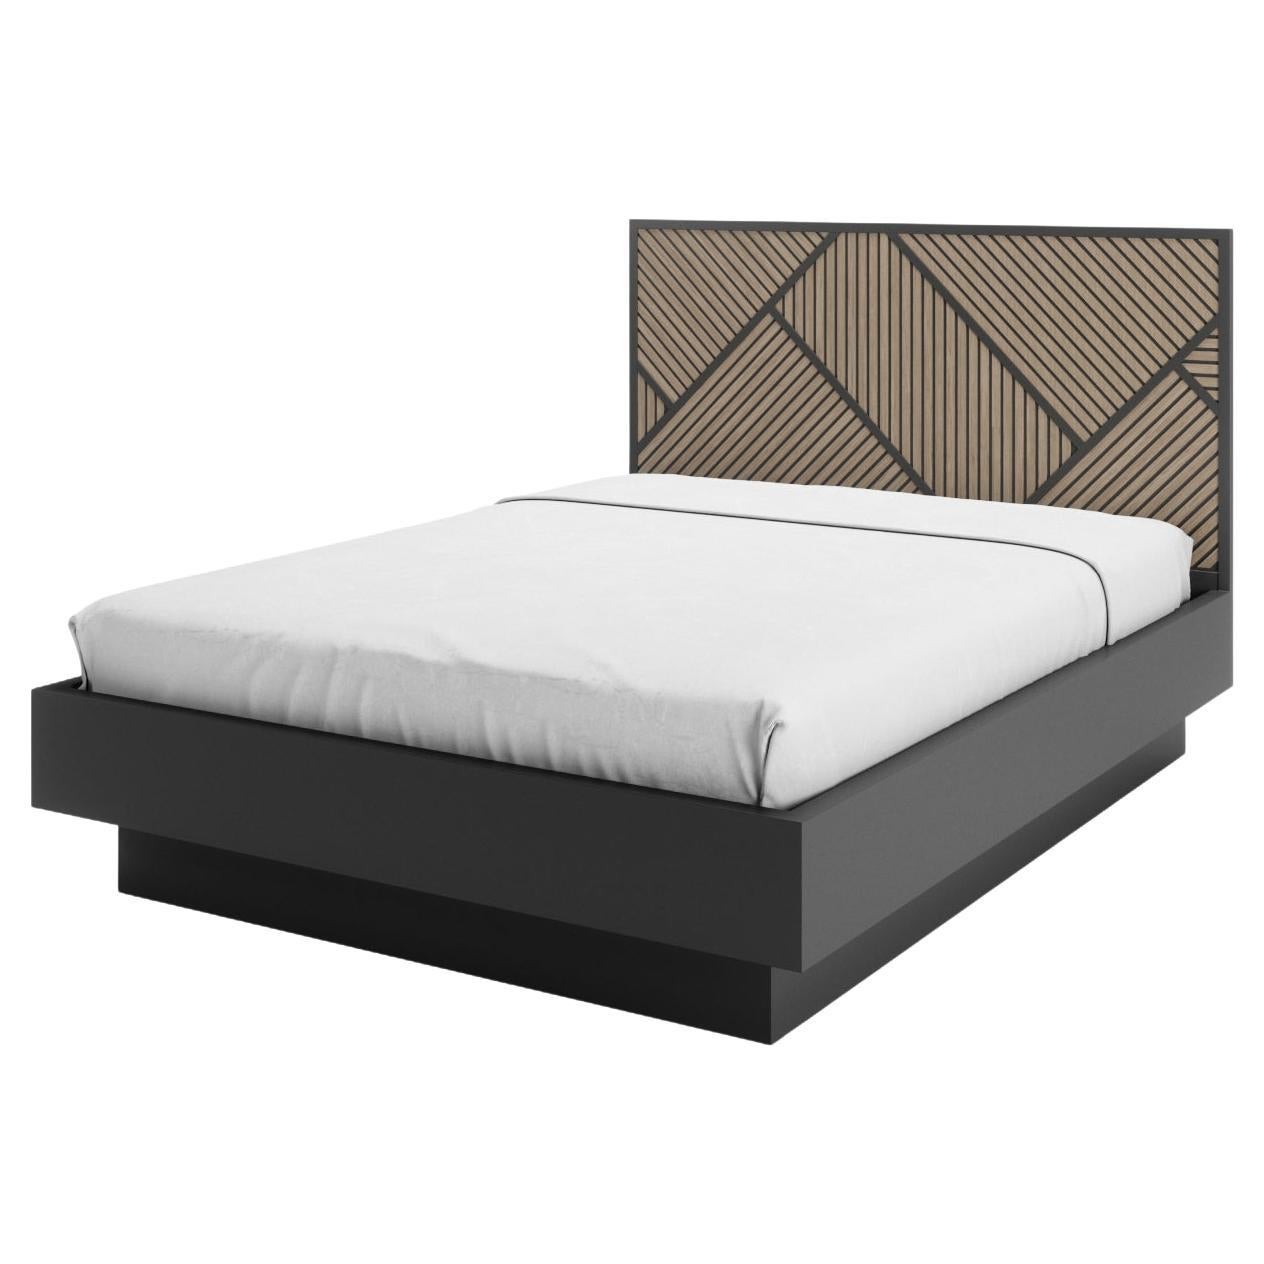 Slide Bed with Storage for Mattress